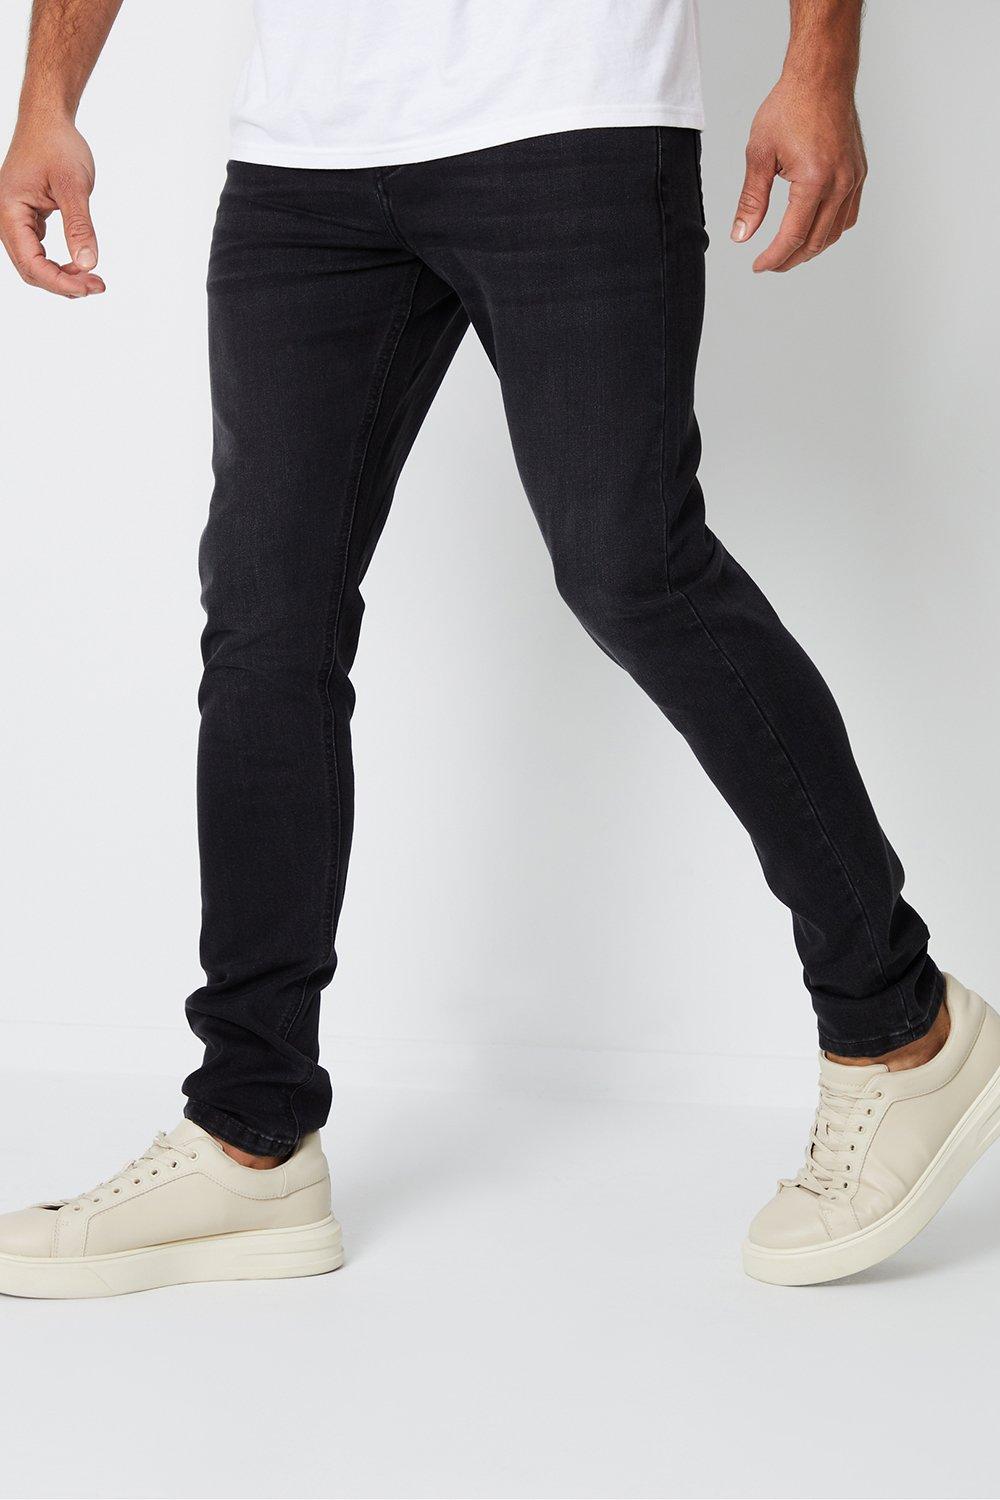 Jeans | 'Pendlebury' Skinny Fit Jeans With Stretch | Threadbare